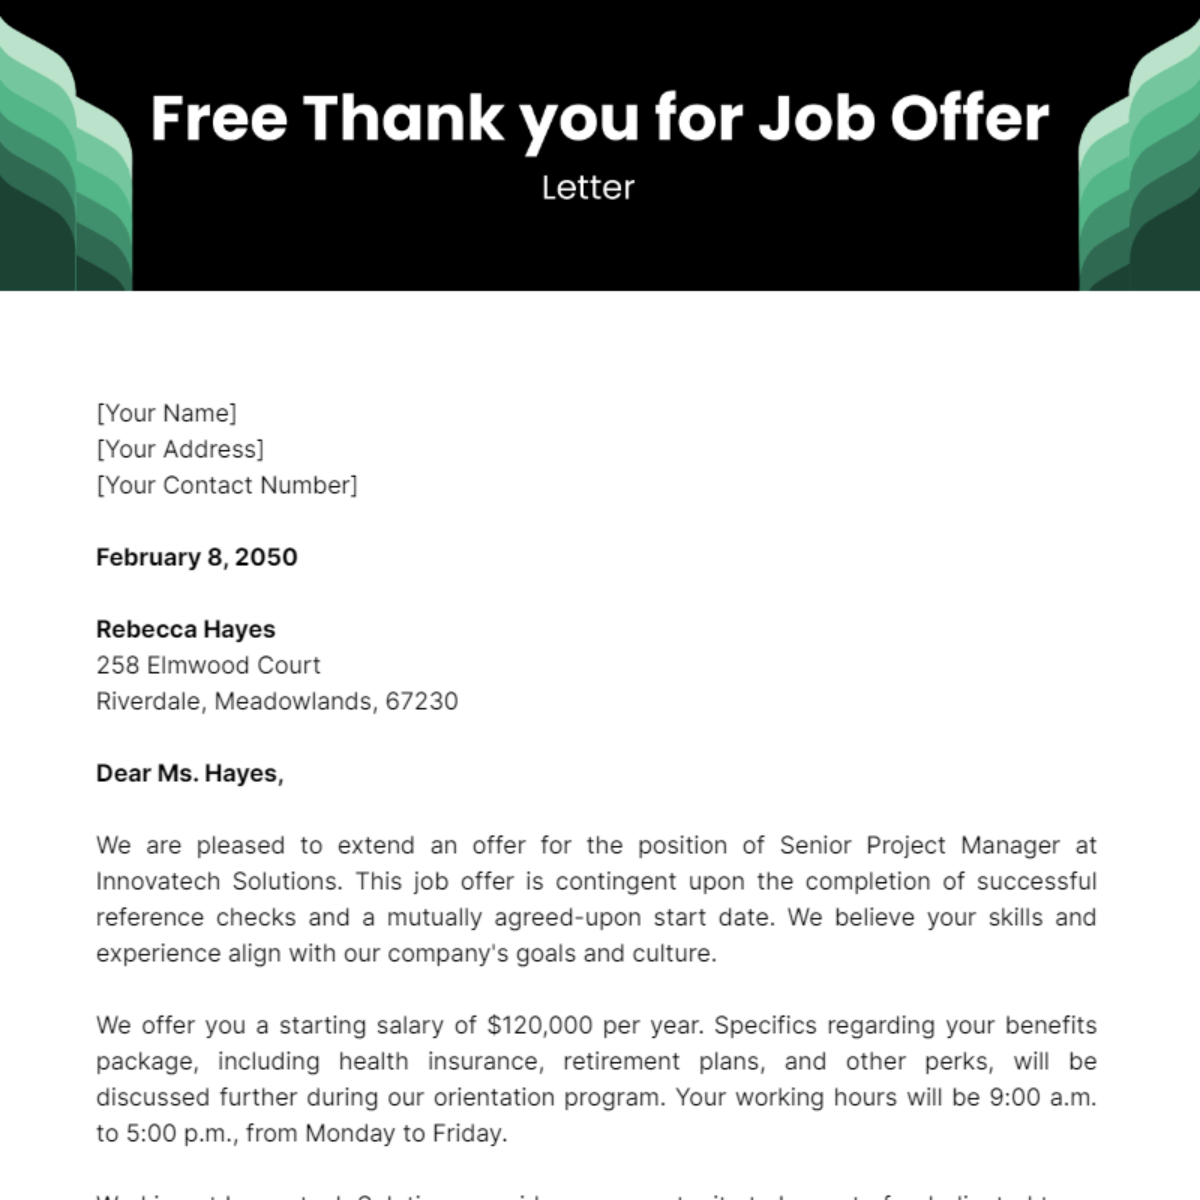 Thank you for Job Offer Letter Template